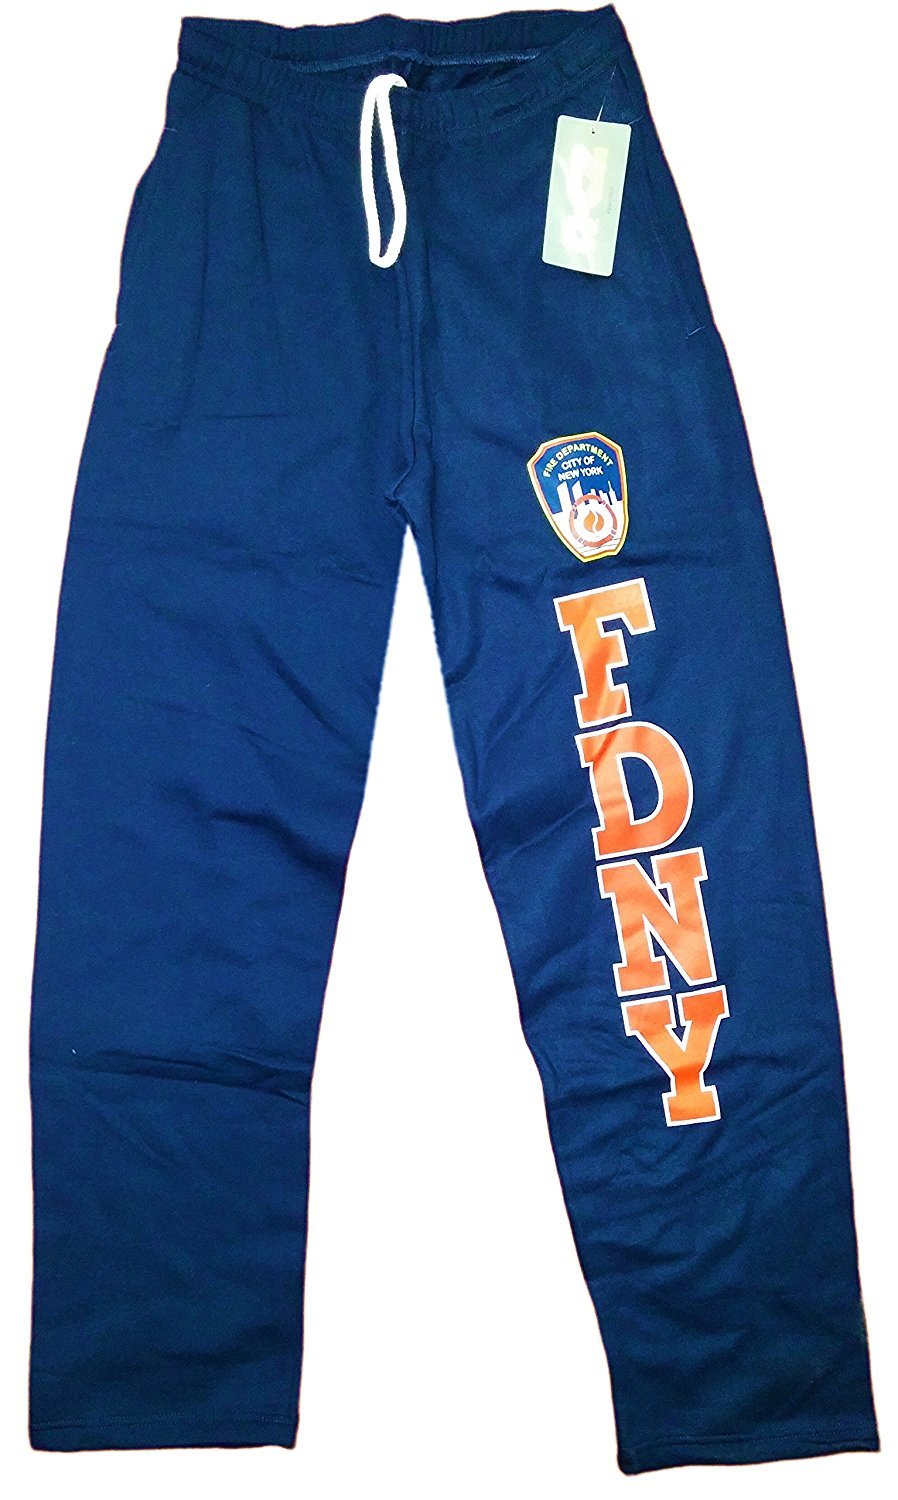 FDNY Sweatpants Official Licensed Mens Pants Navy Blue